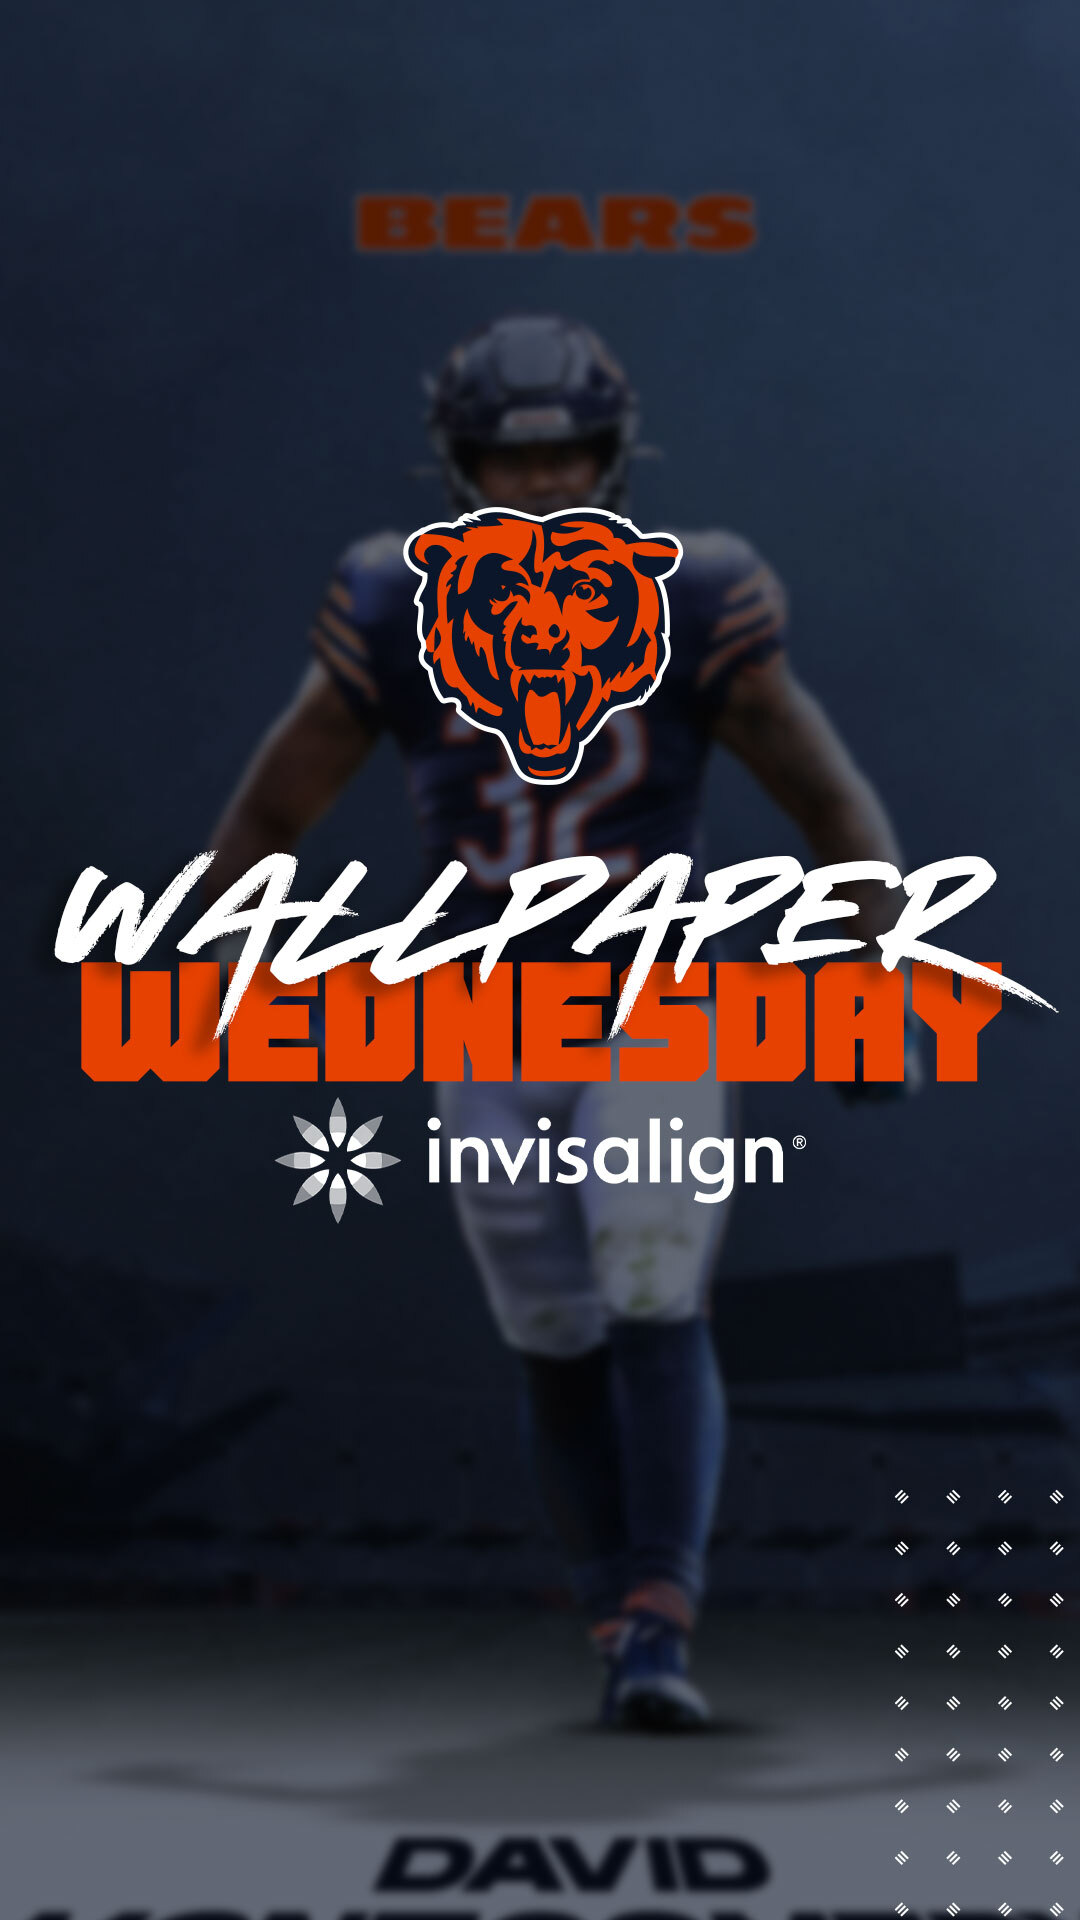 Chicago Bears on X: 'Some wallpapers for your Wednesday. @Invisalign